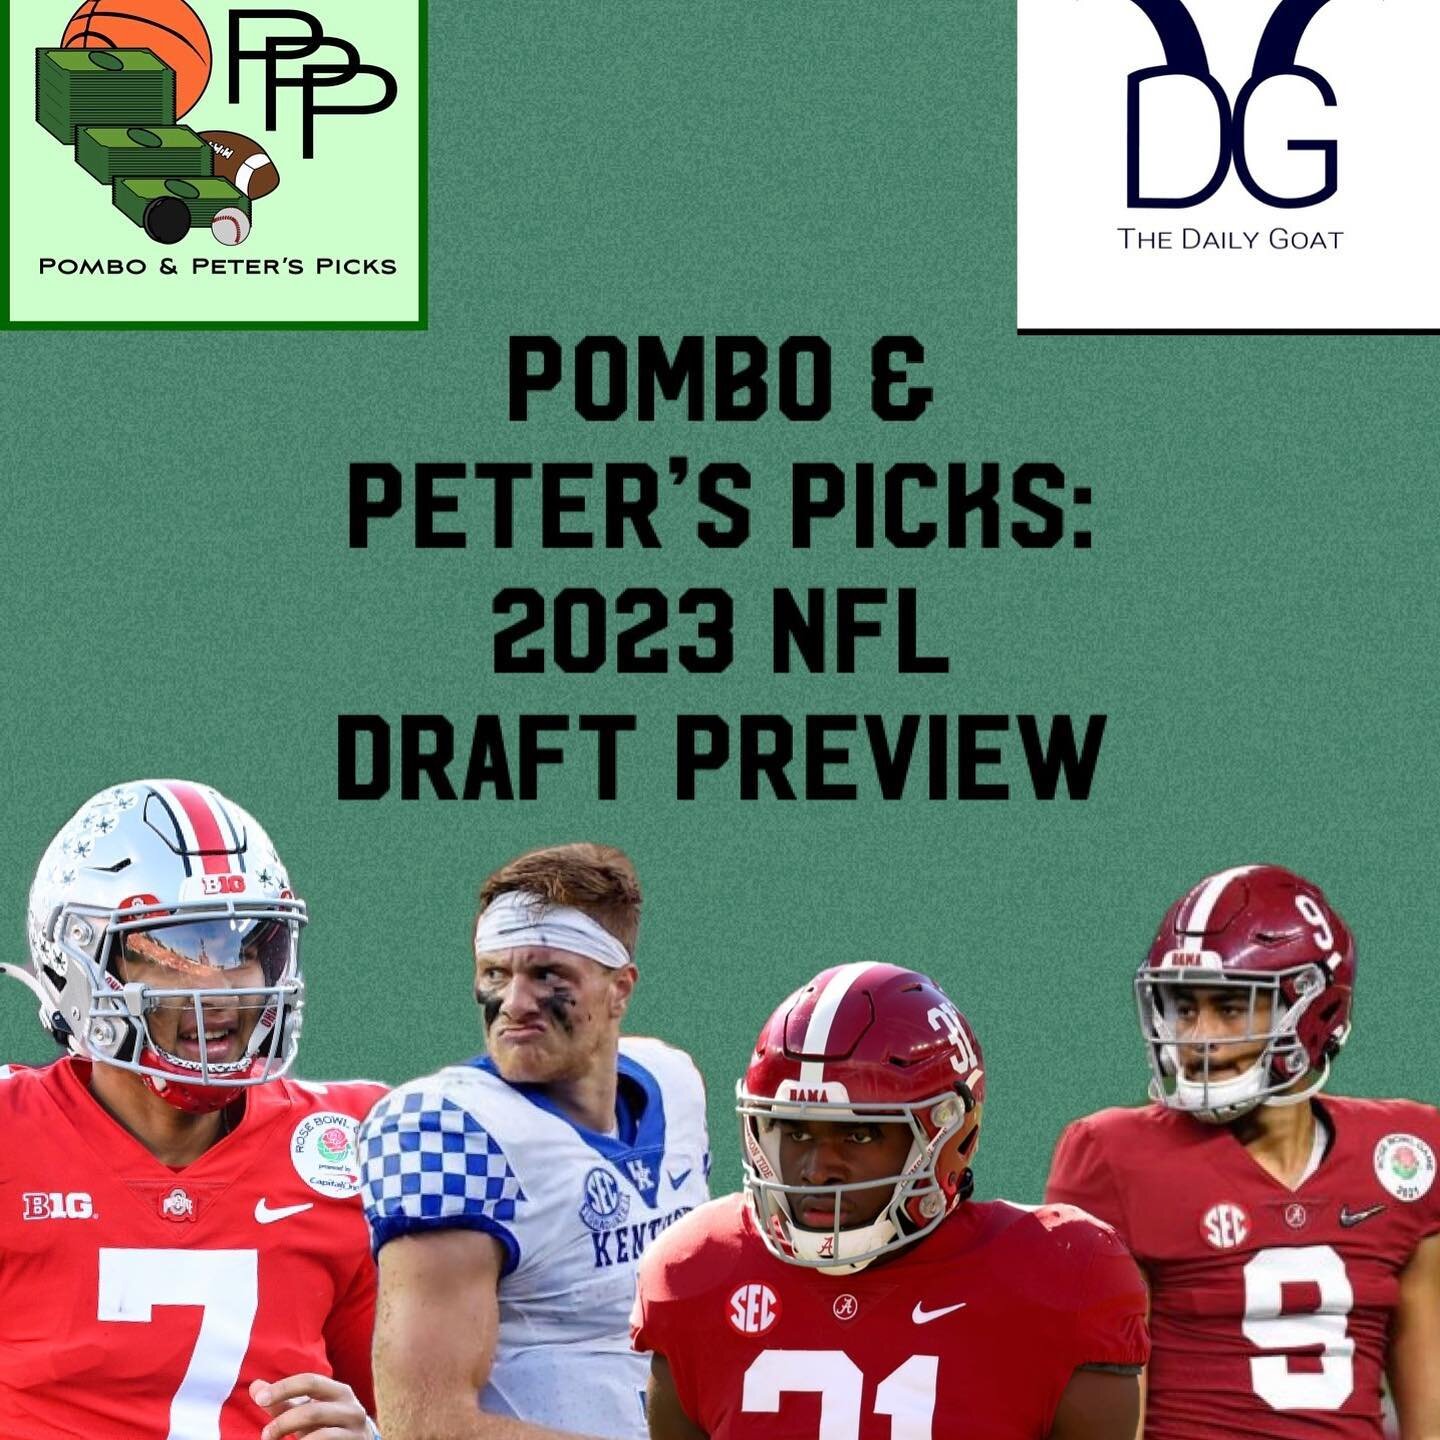 The new episode of @_pppicks with @jpombo24 &amp; @peteralves52 is out!

🏈 @b_carr13 , @djsarv21 , @nberndt37 , &amp; @mcunha77 join the show to preview the NFL Draft .

⭐️ Which players will be the best in this draft class?

📉 Which players will b